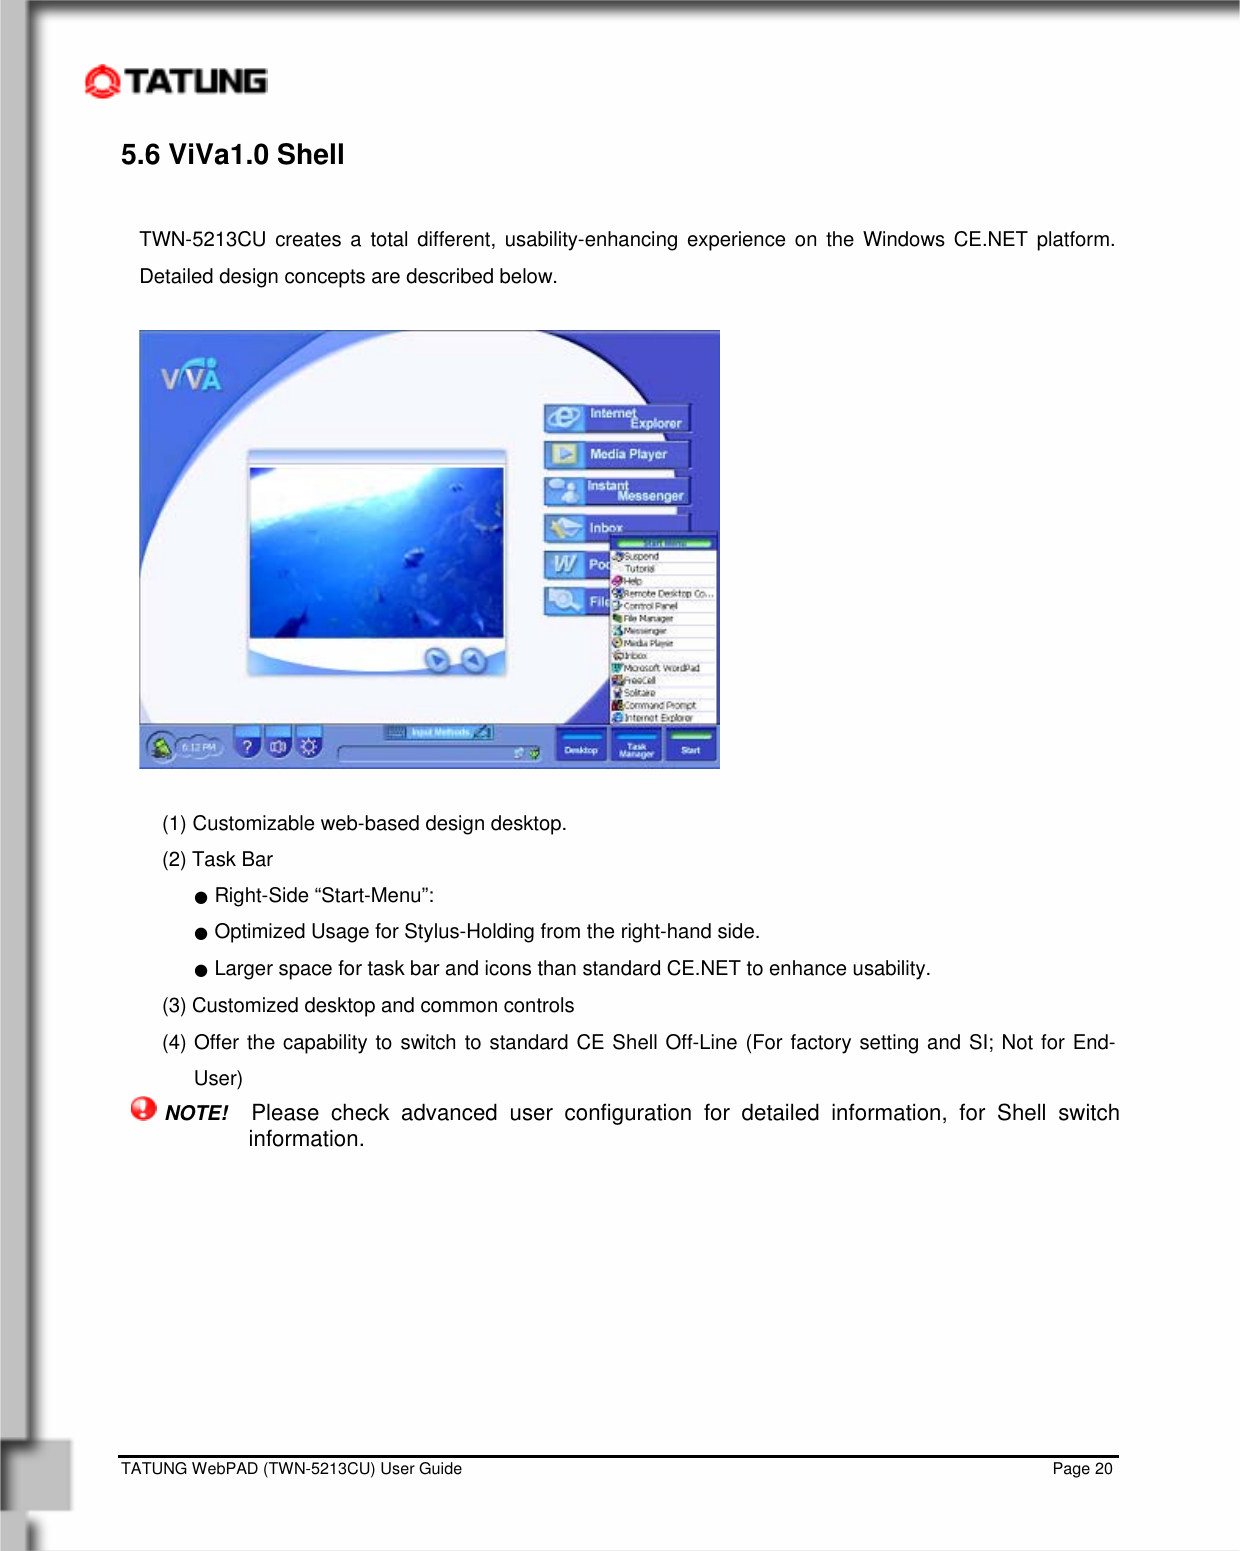    TATUNG WebPAD (TWN-5213CU) User Guide                                                                                                                                   Page 20 5.6 ViVa1.0 Shell  TWN-5213CU creates a total different, usability-enhancing experience on the Windows CE.NET platform. Detailed design concepts are described below.    (1) Customizable web-based design desktop. (2) Task Bar  ● Right-Side “Start-Menu”:  ● Optimized Usage for Stylus-Holding from the right-hand side. ● Larger space for task bar and icons than standard CE.NET to enhance usability. (3) Customized desktop and common controls (4) Offer the capability to switch to standard CE Shell Off-Line (For factory setting and SI; Not for End-User)   NOTE!  Please check advanced user configuration for detailed information, for Shell switch information.  